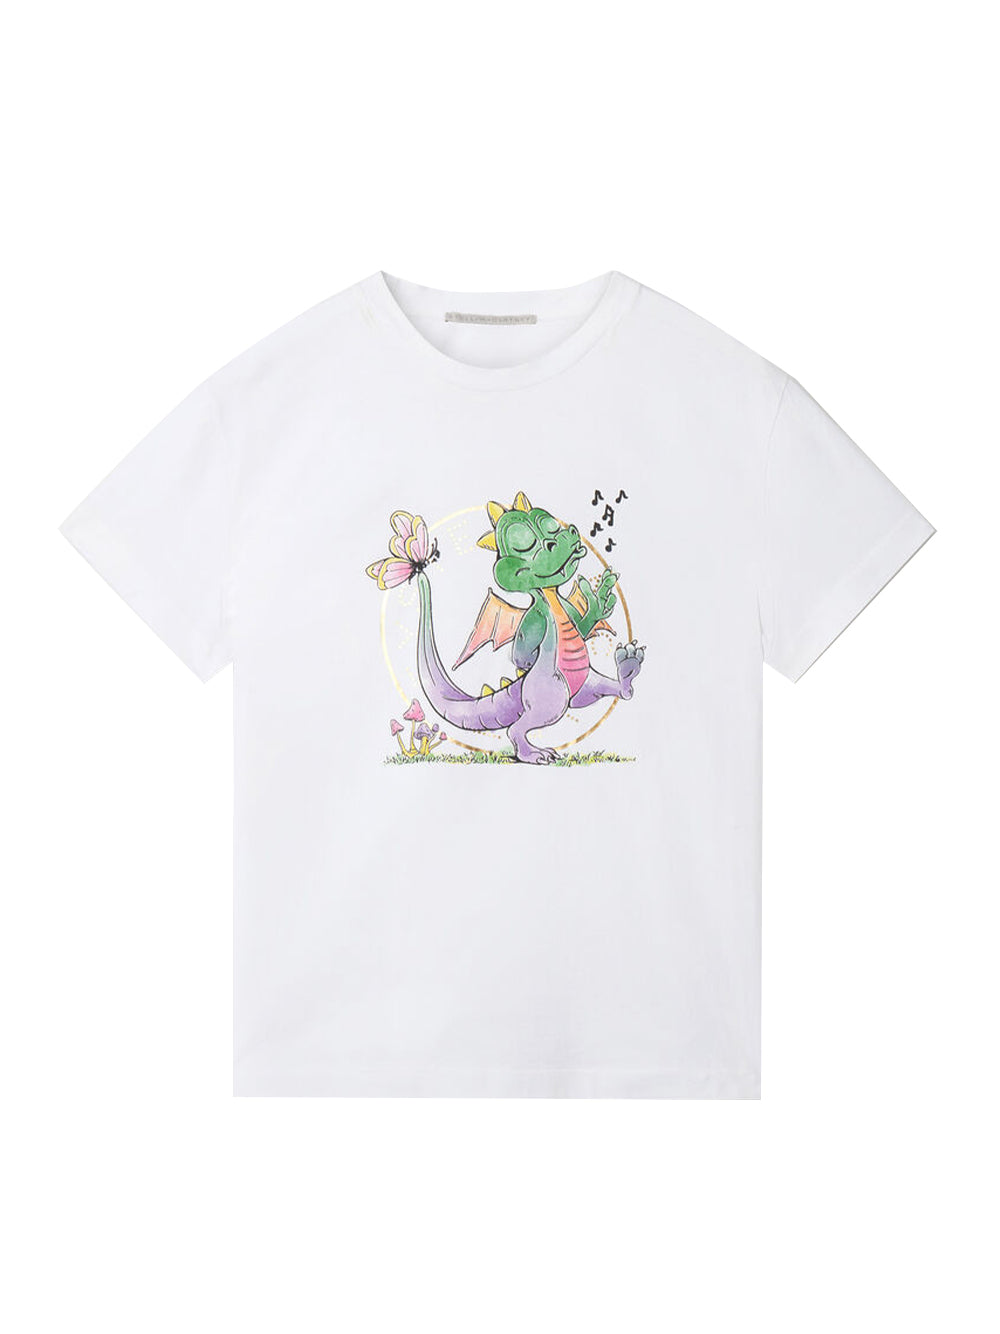 Year of the Dragon Print T-Shirt (Pure White)